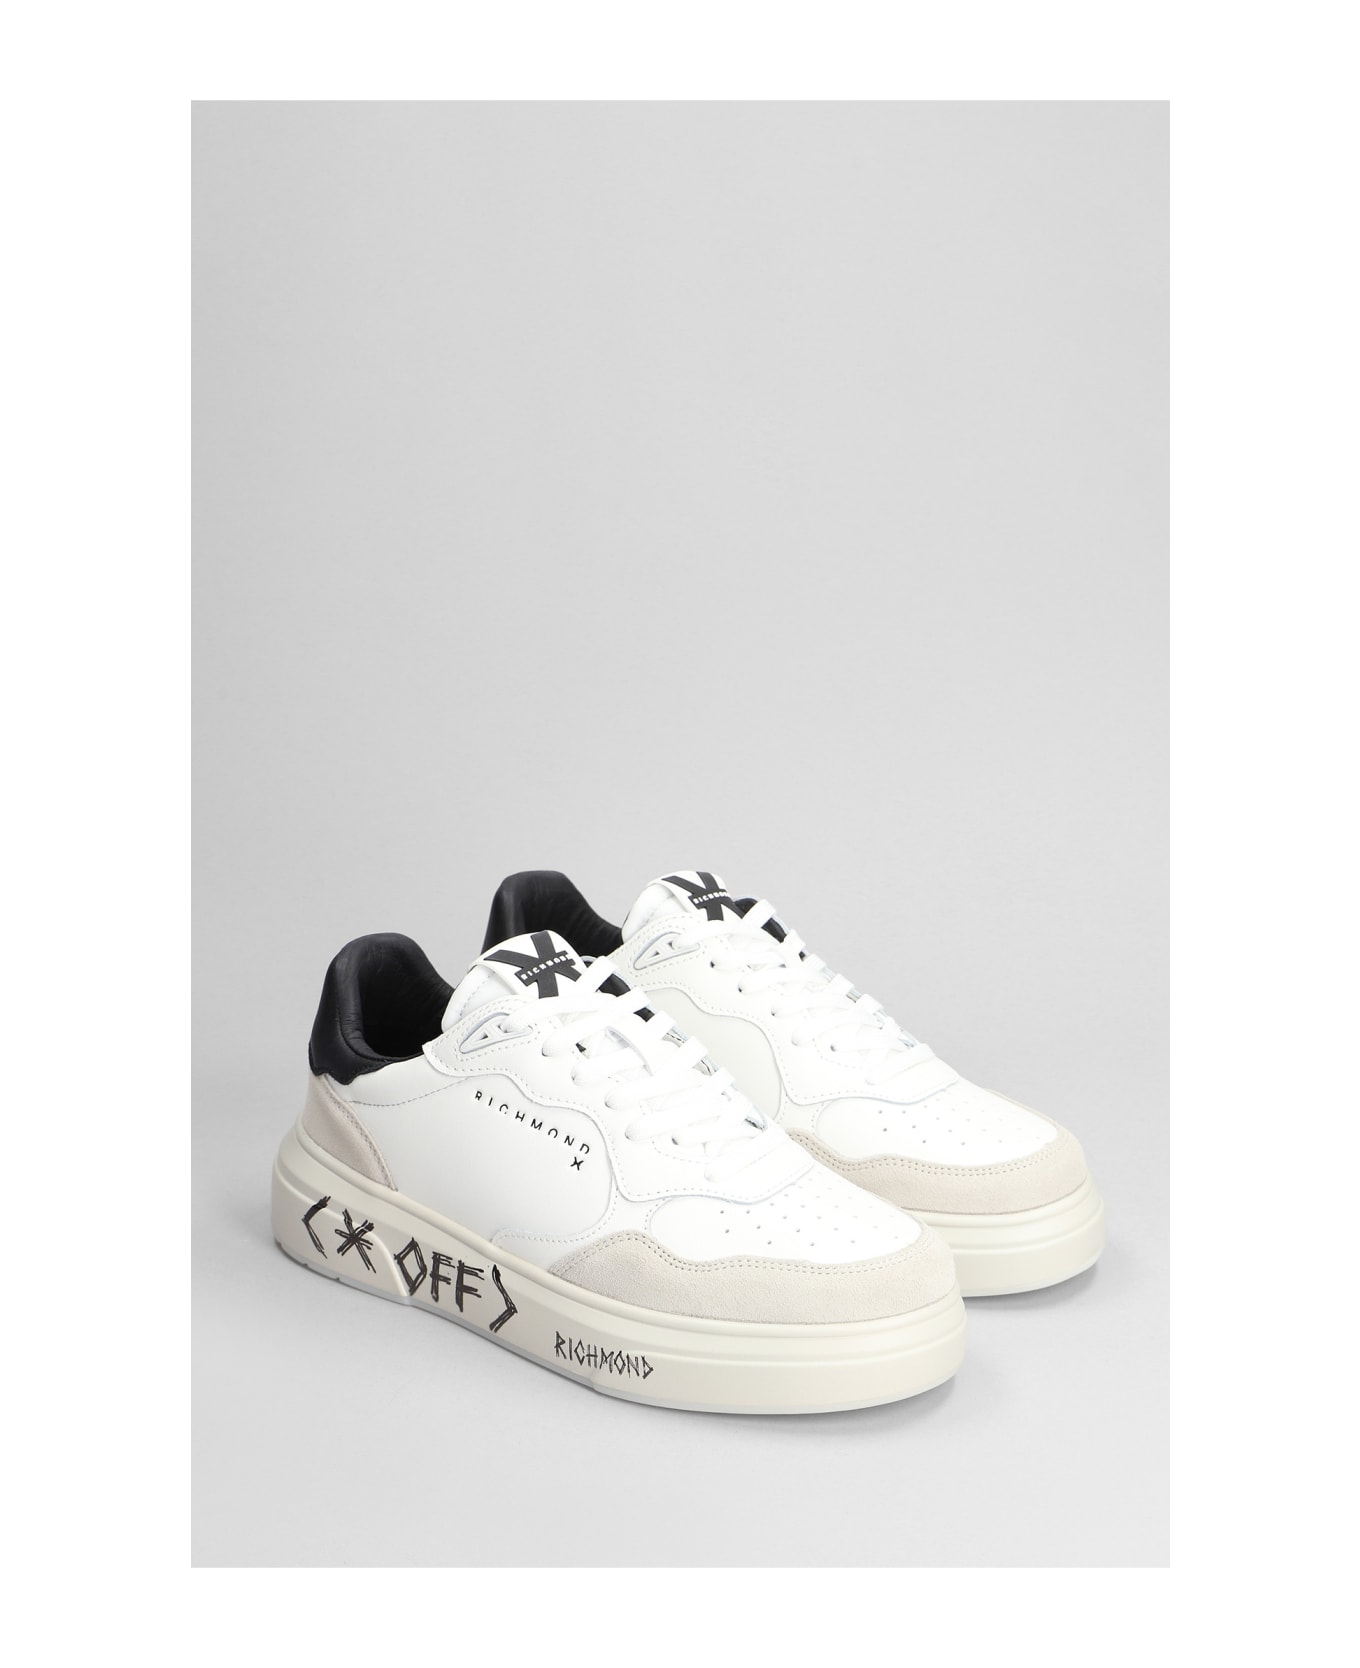 John Richmond Sneakers In White Suede And Leather - white スニーカー